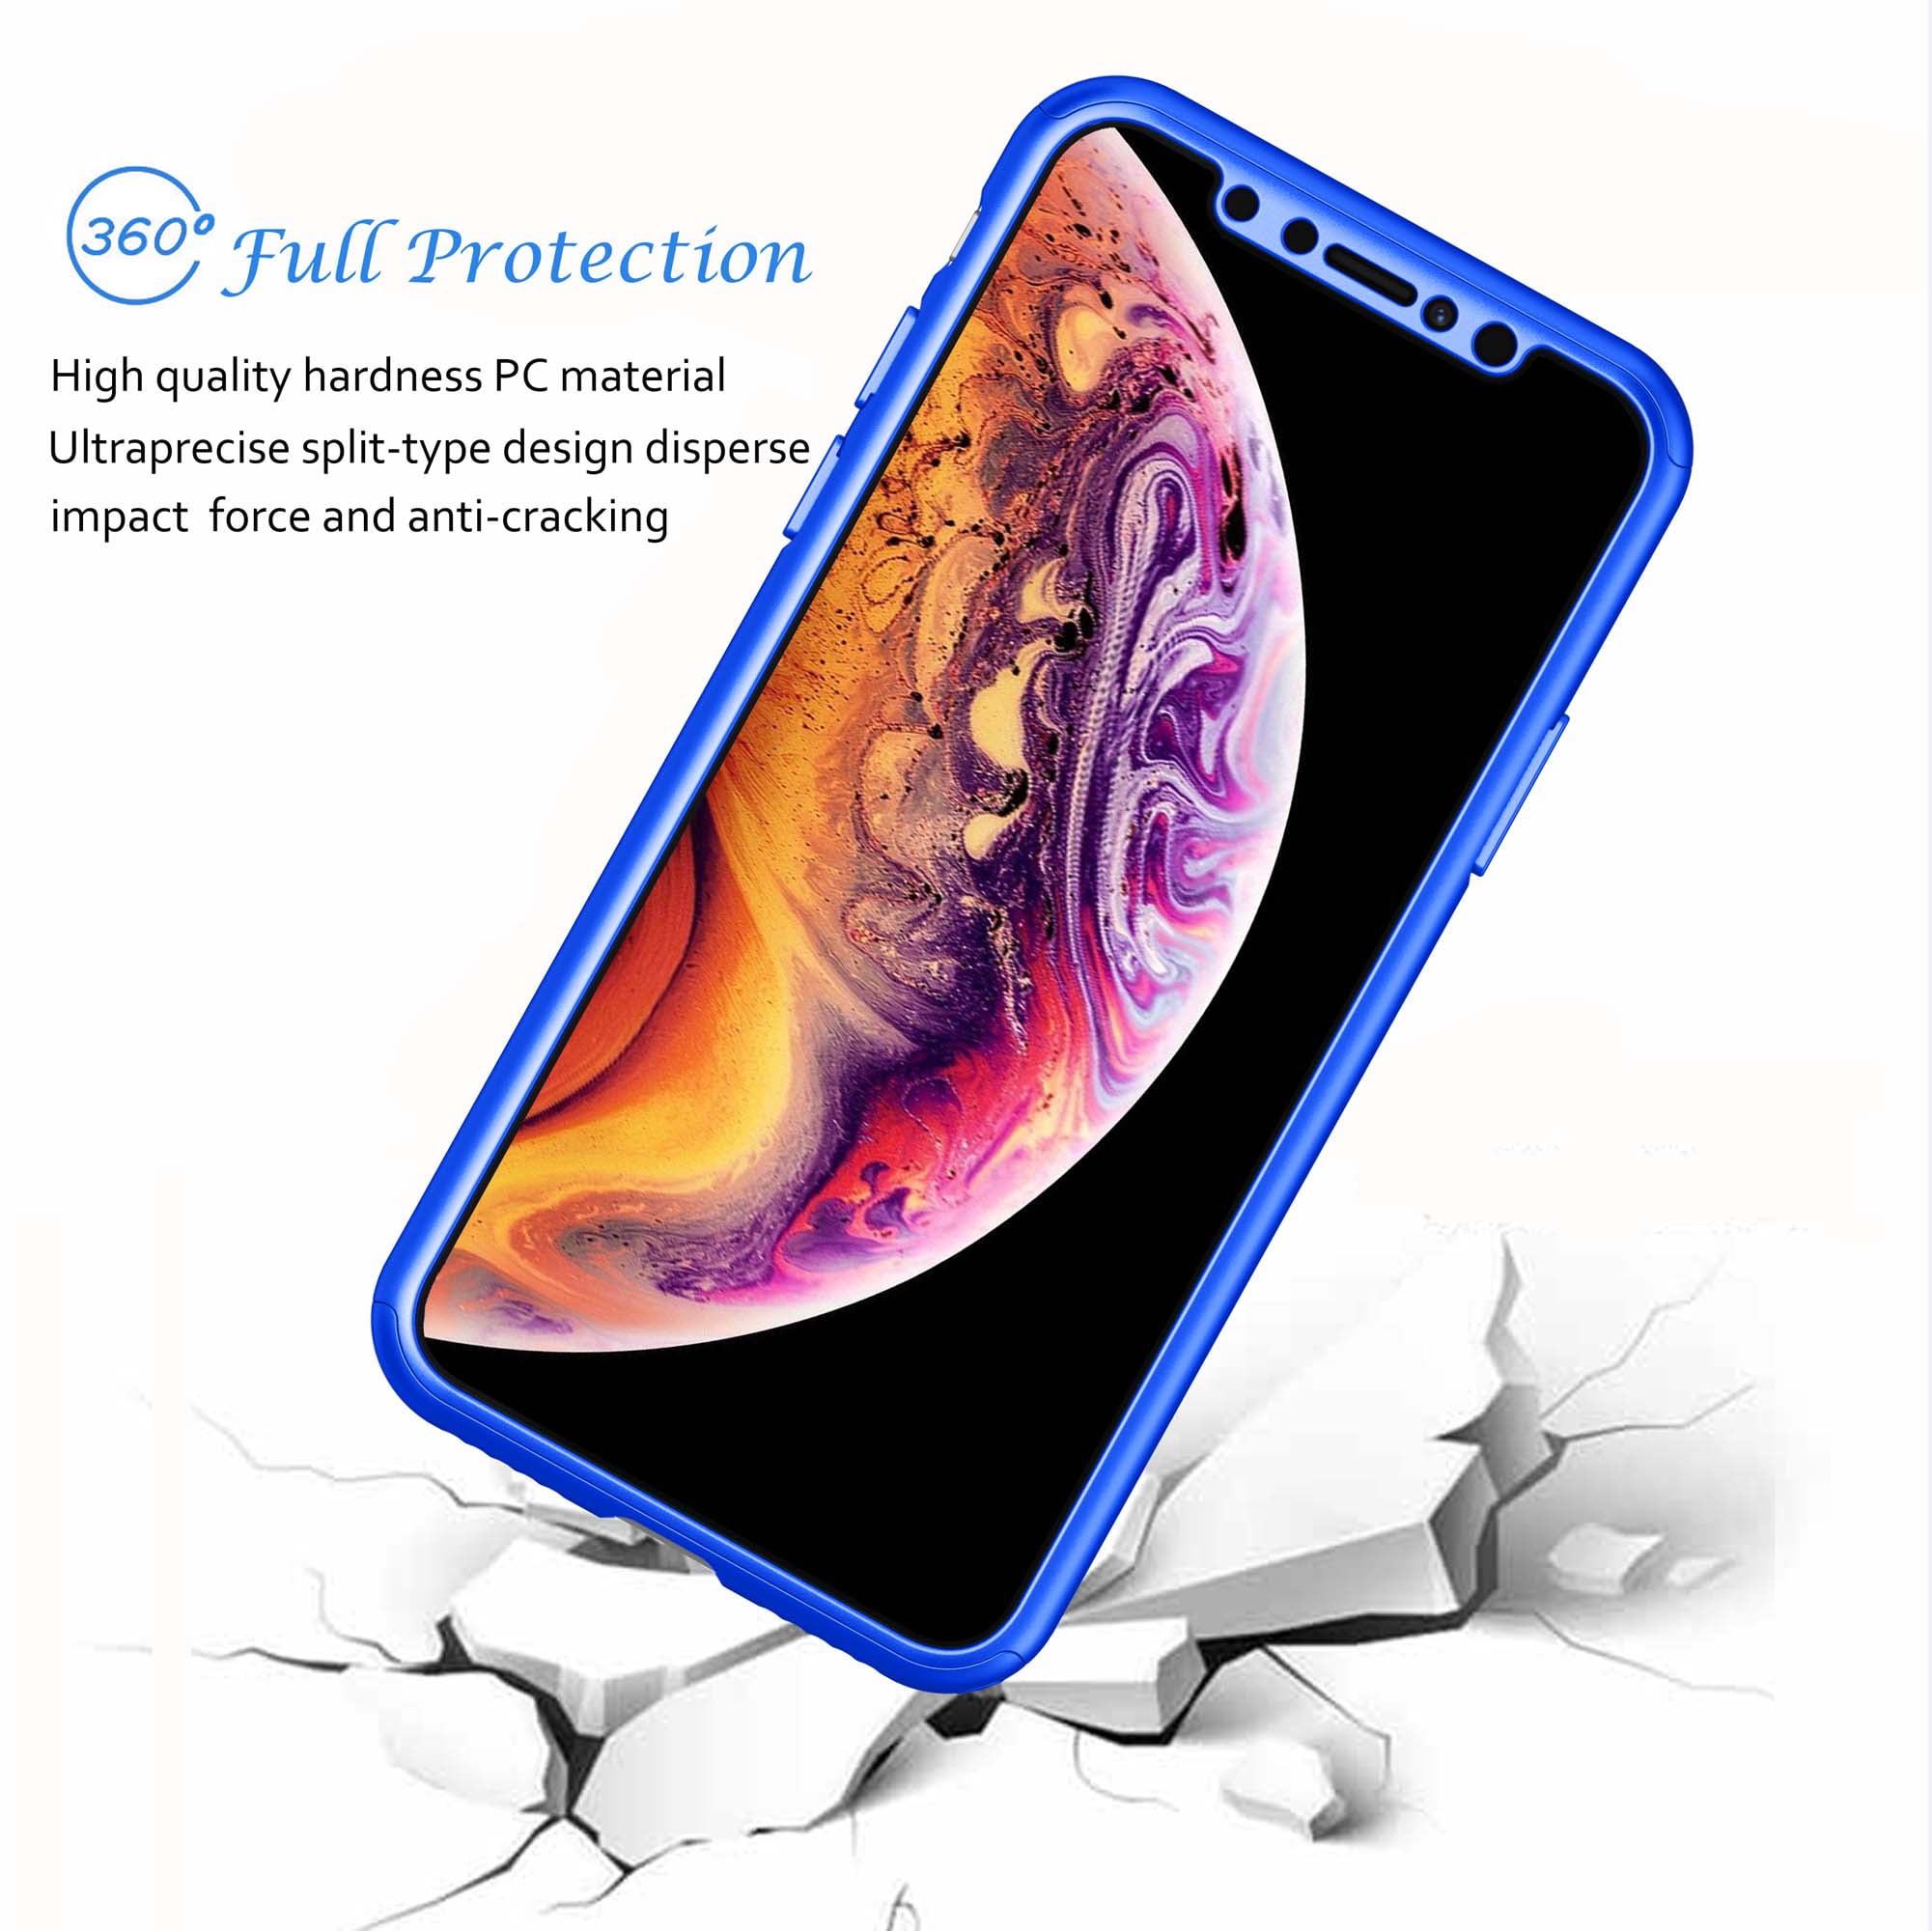 iPhone 11 Pro Max Case, iPhone 11 Pro Max Screen Protector, Njjex  Ultra-Thin Hard Plastic Full Protective Cover with Tempered Glass Screen  Protector